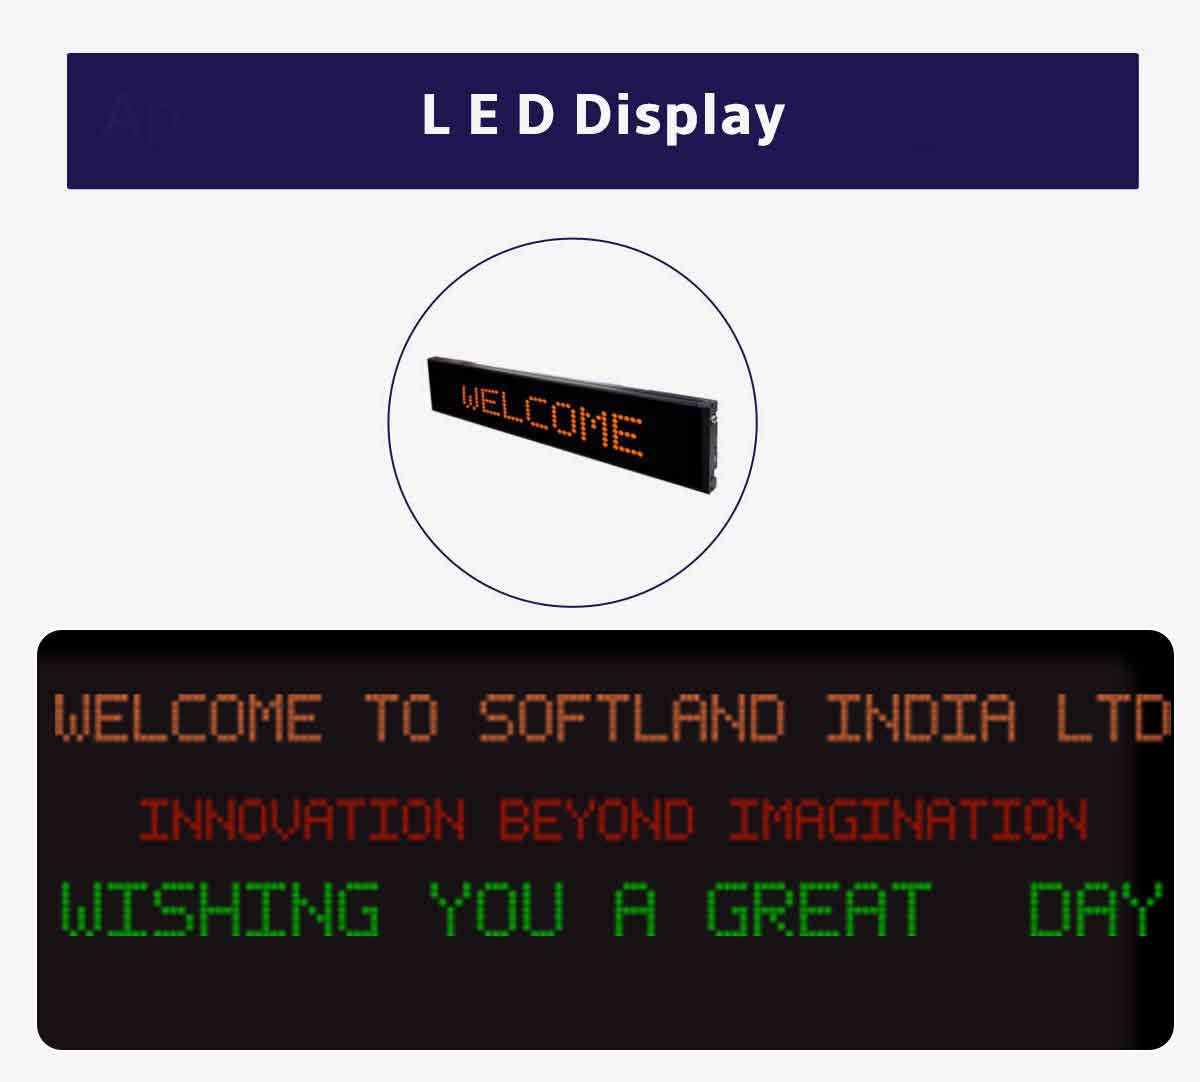 LED Display Panel in India